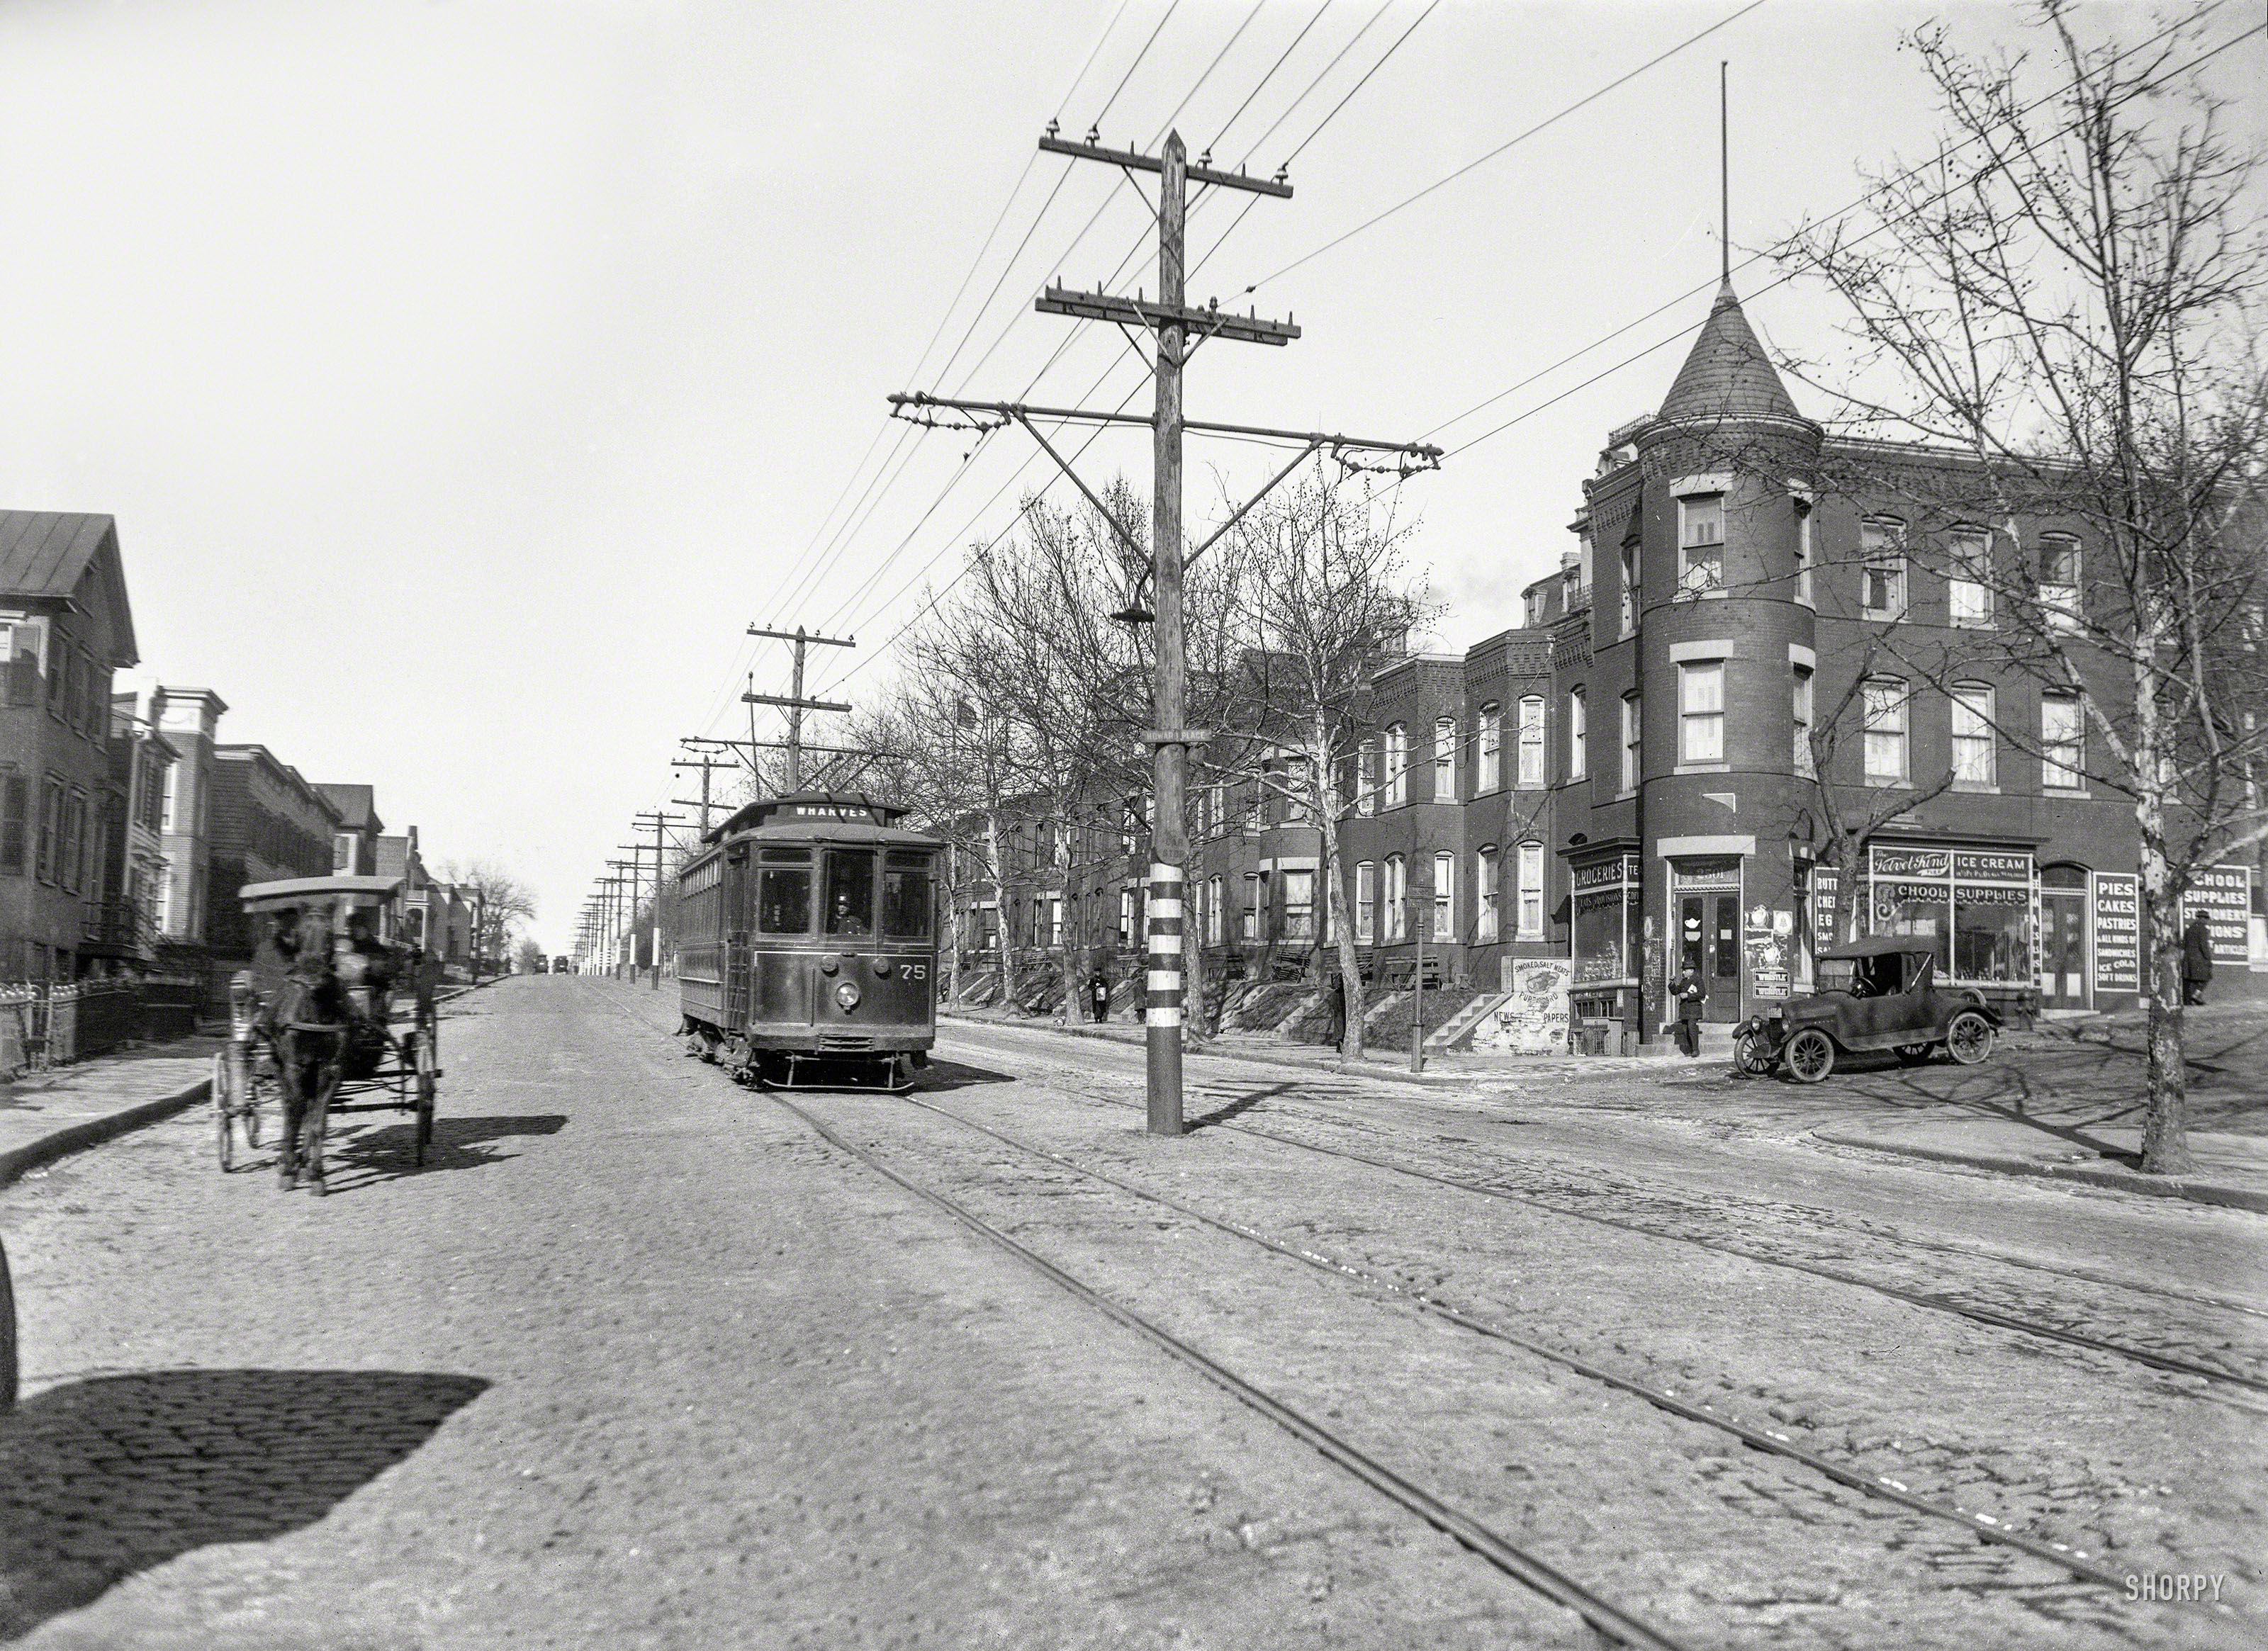 Washington, D.C., circa 1921, looking up Georgia Avenue at Howard Place, and Jacob Katzen's grocery, dealer in Velvet Kind ice cream and Whistle. Another Harris & Ewing glass negative from the "traffic" series. View full size.